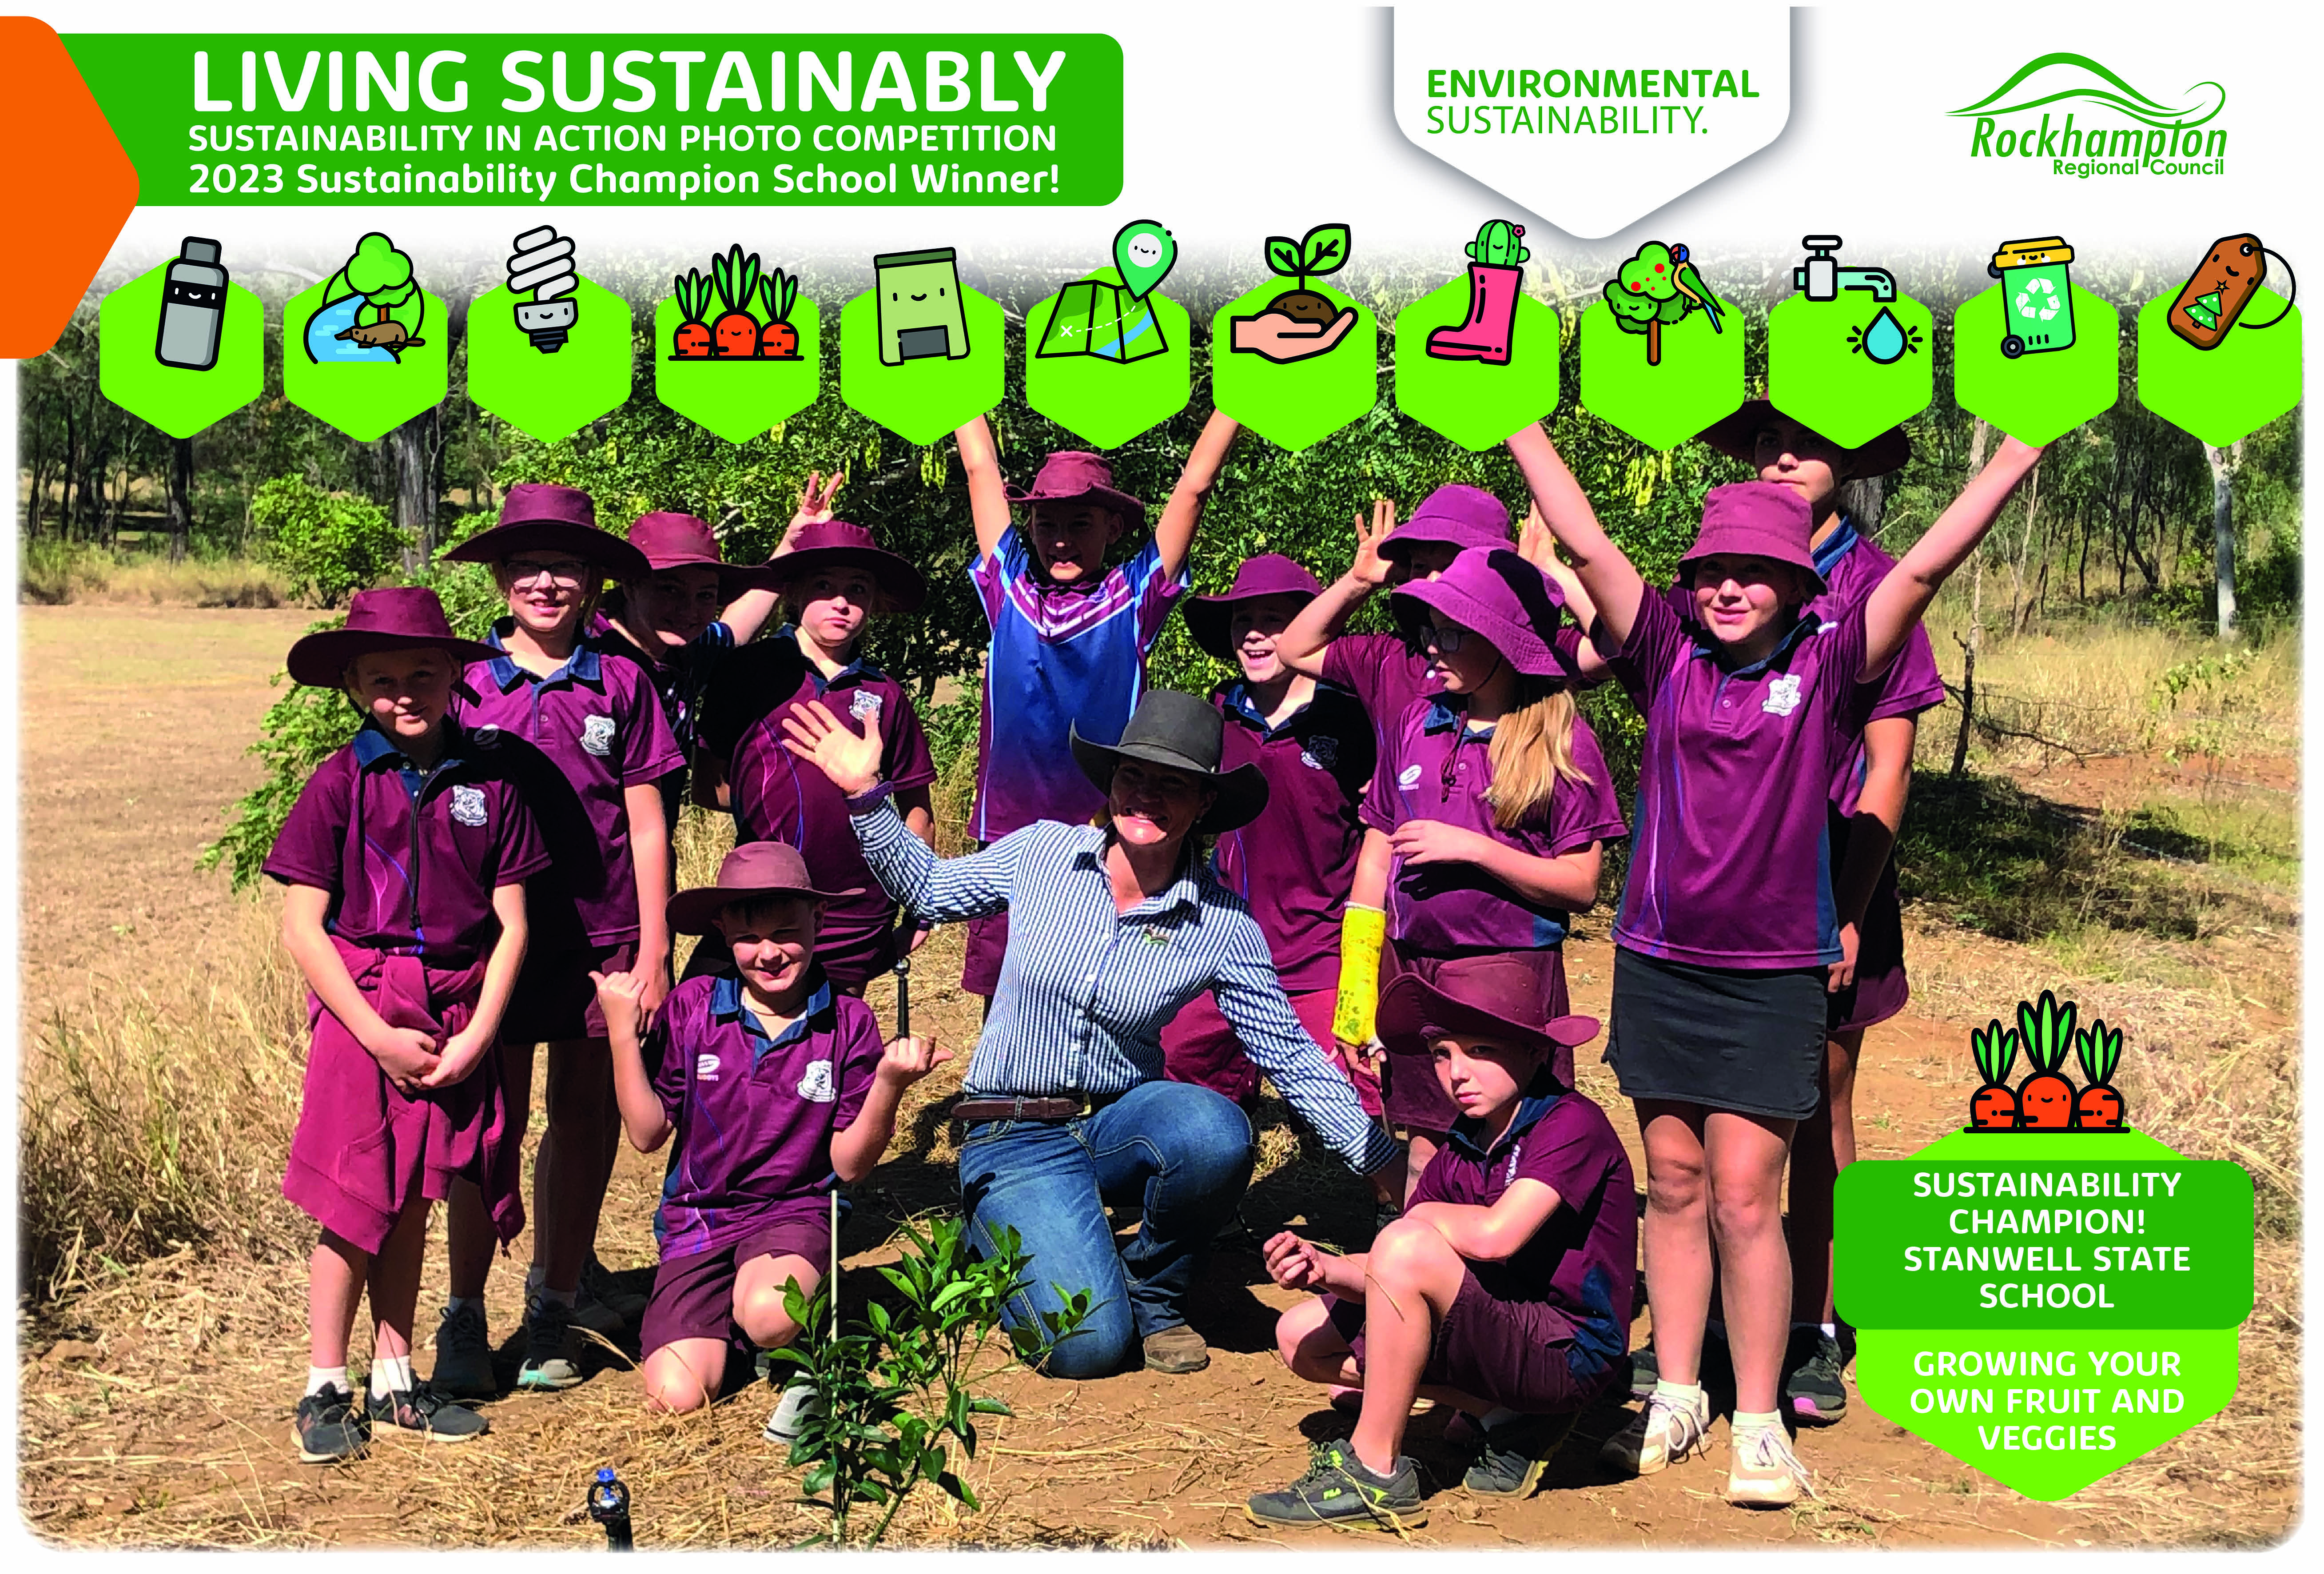 2023-SCHOOL-Sustainability-in-Action-Photo-Comp-Stanwell-State-School